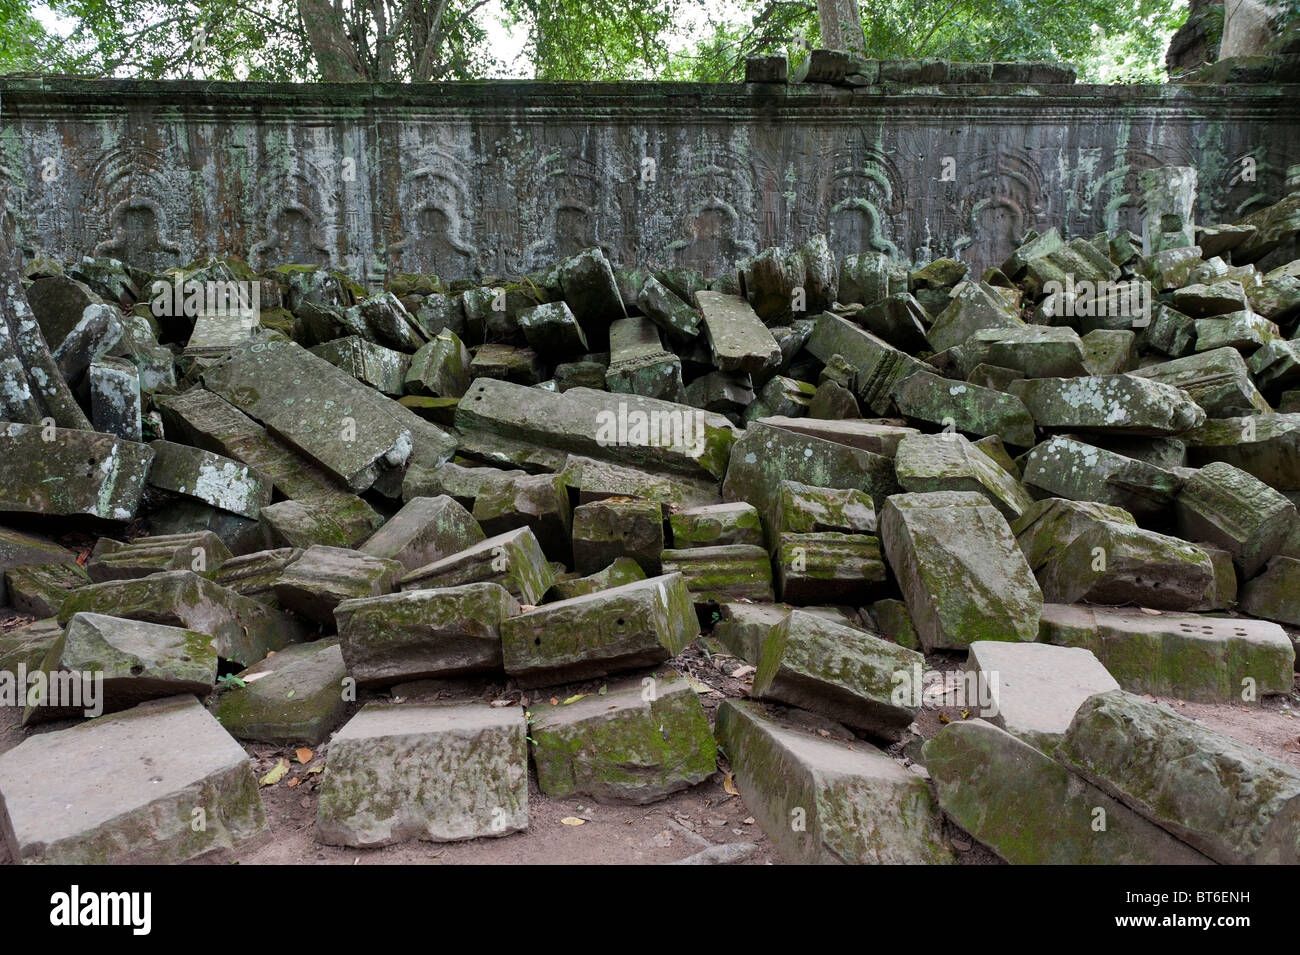 Ruins around the Outer Wall Surrounding Ta Prohm Temple, Angkor Wat Cambodia Stock Photo